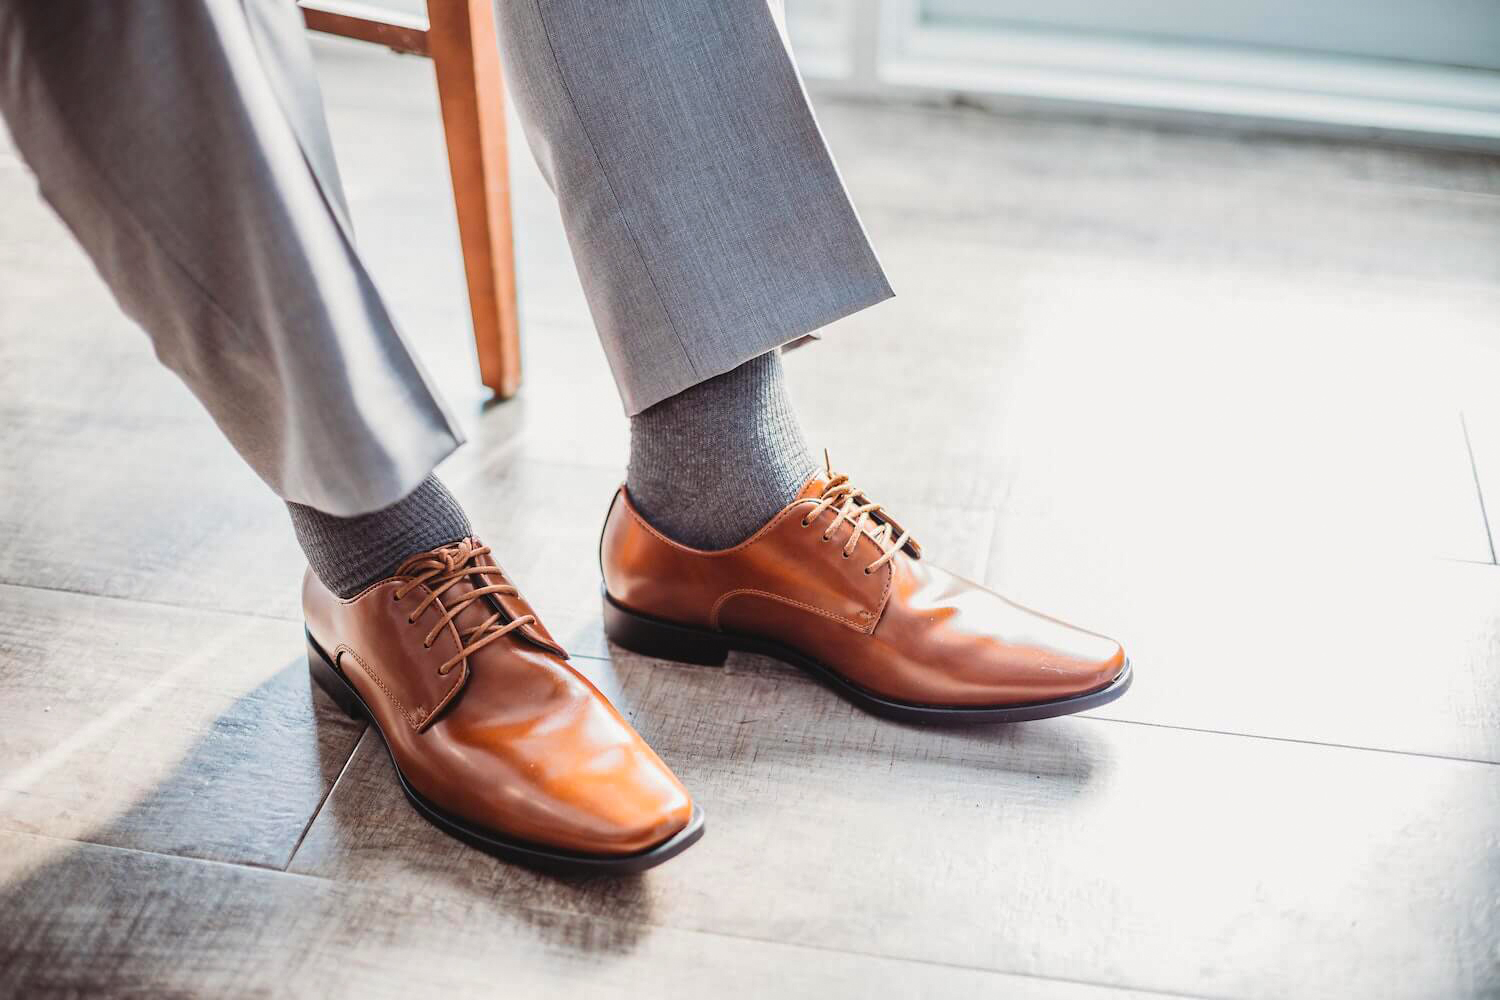 What color socks go with brown shoes? - Quora